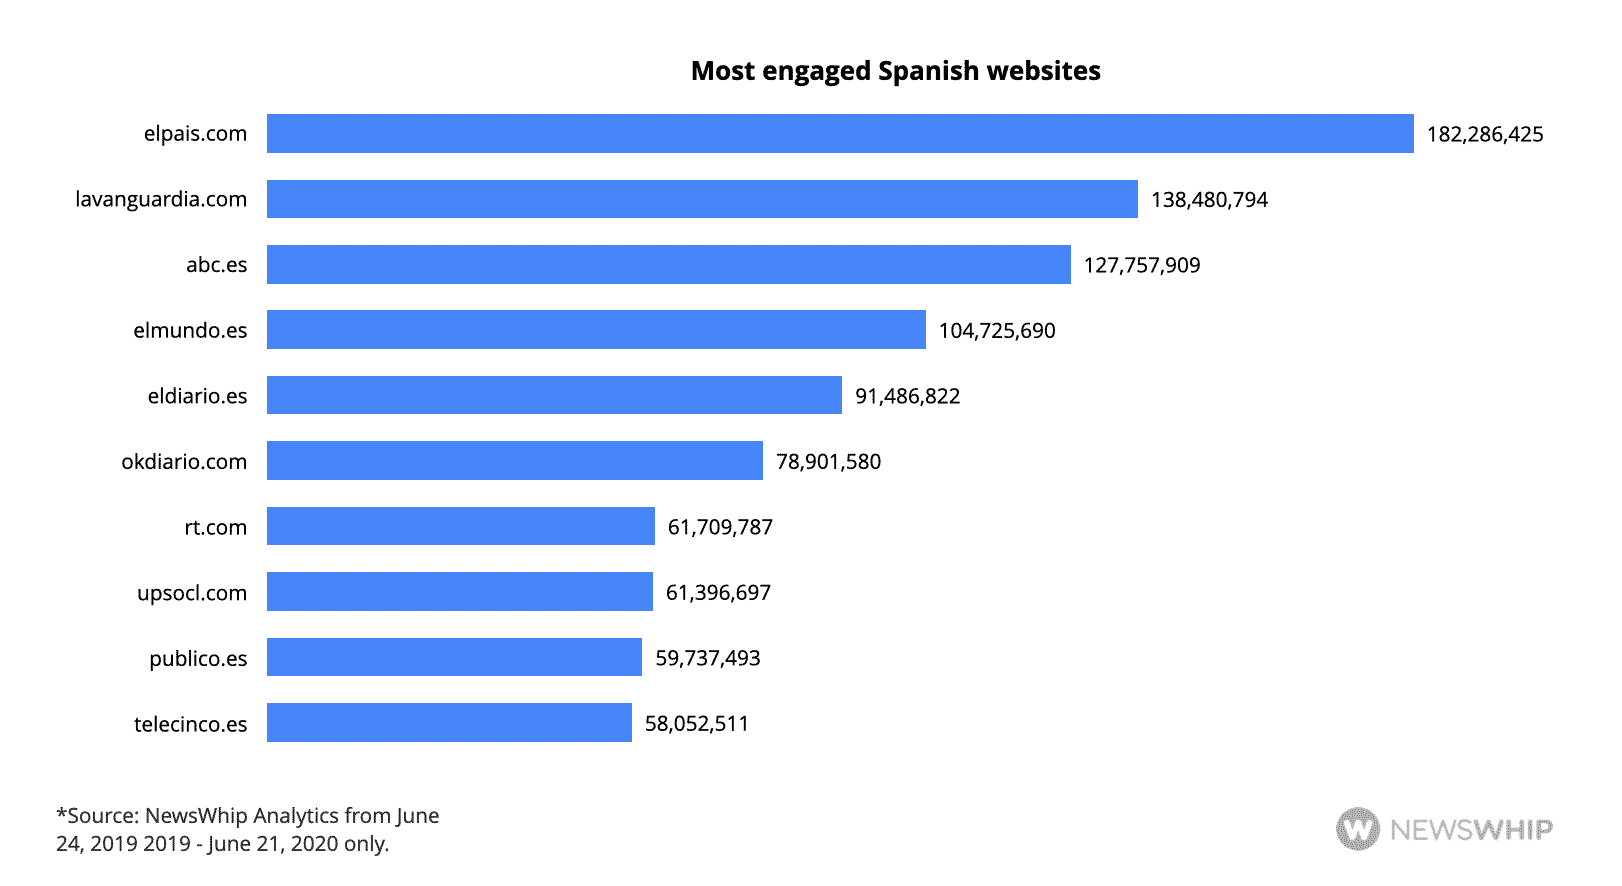 Histogram showing the top Spanish publishers, ranked by engagement